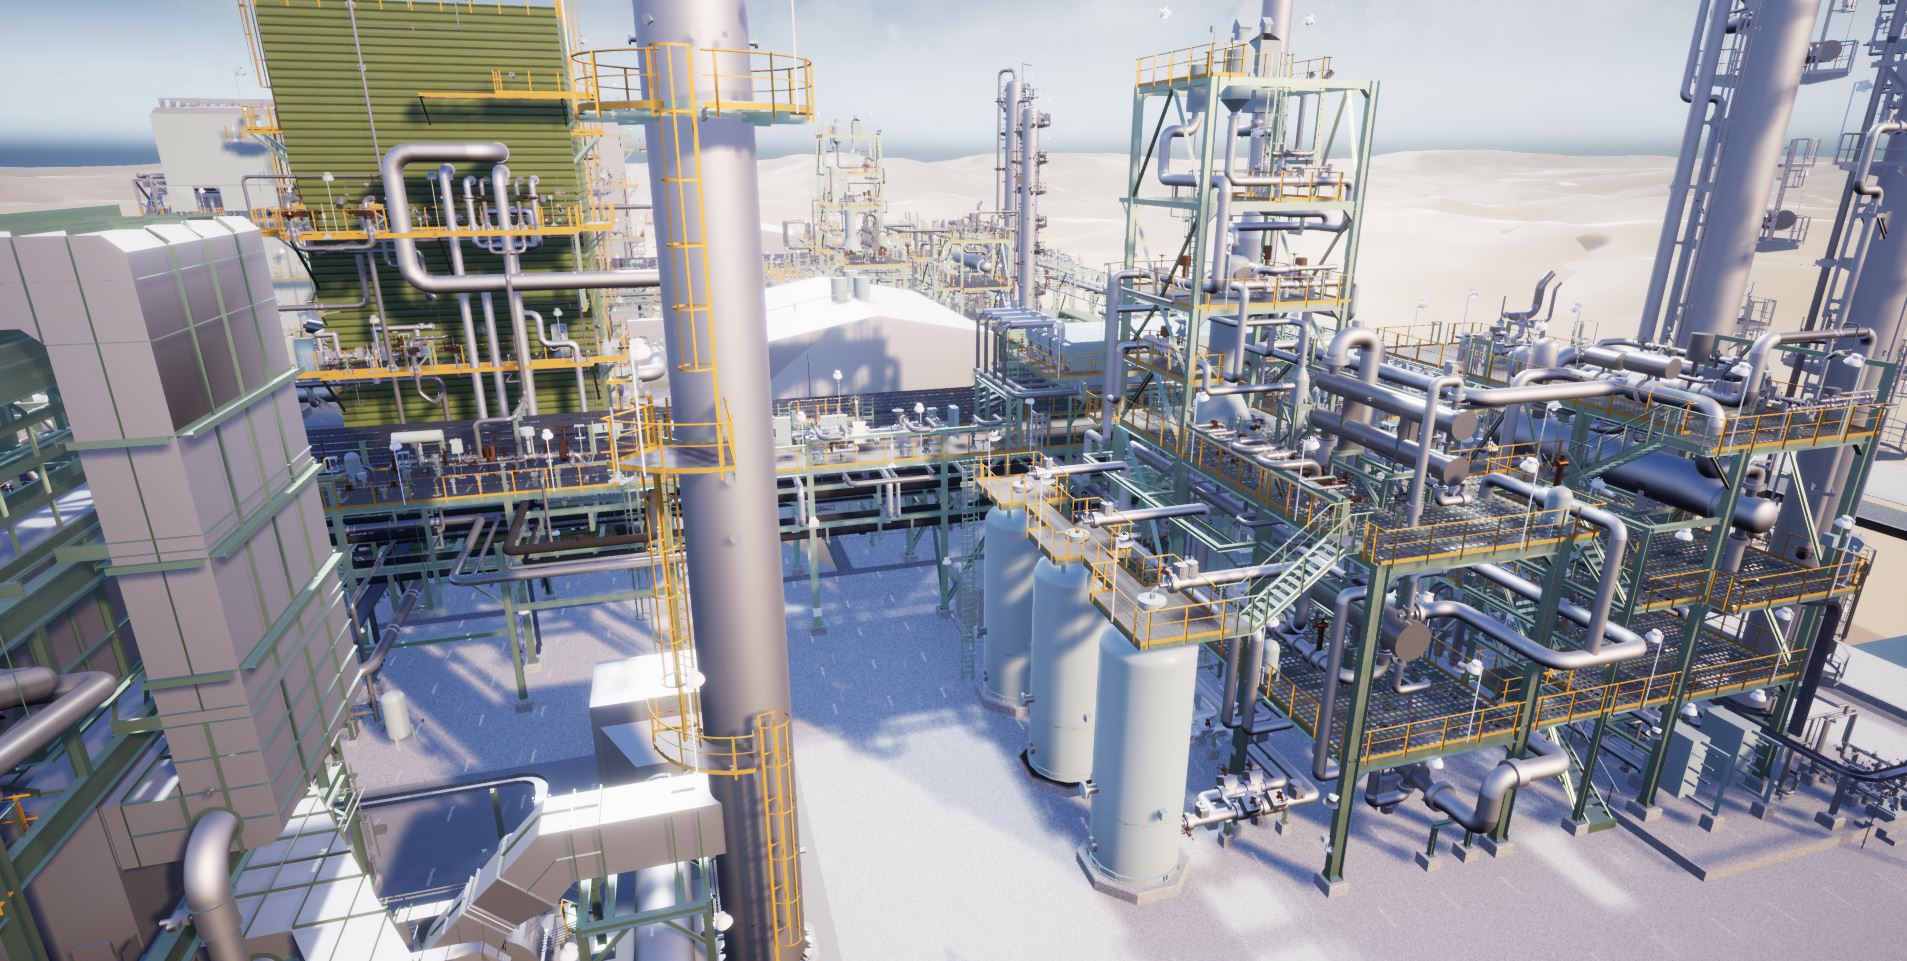 exact VR replica of an industrial plant